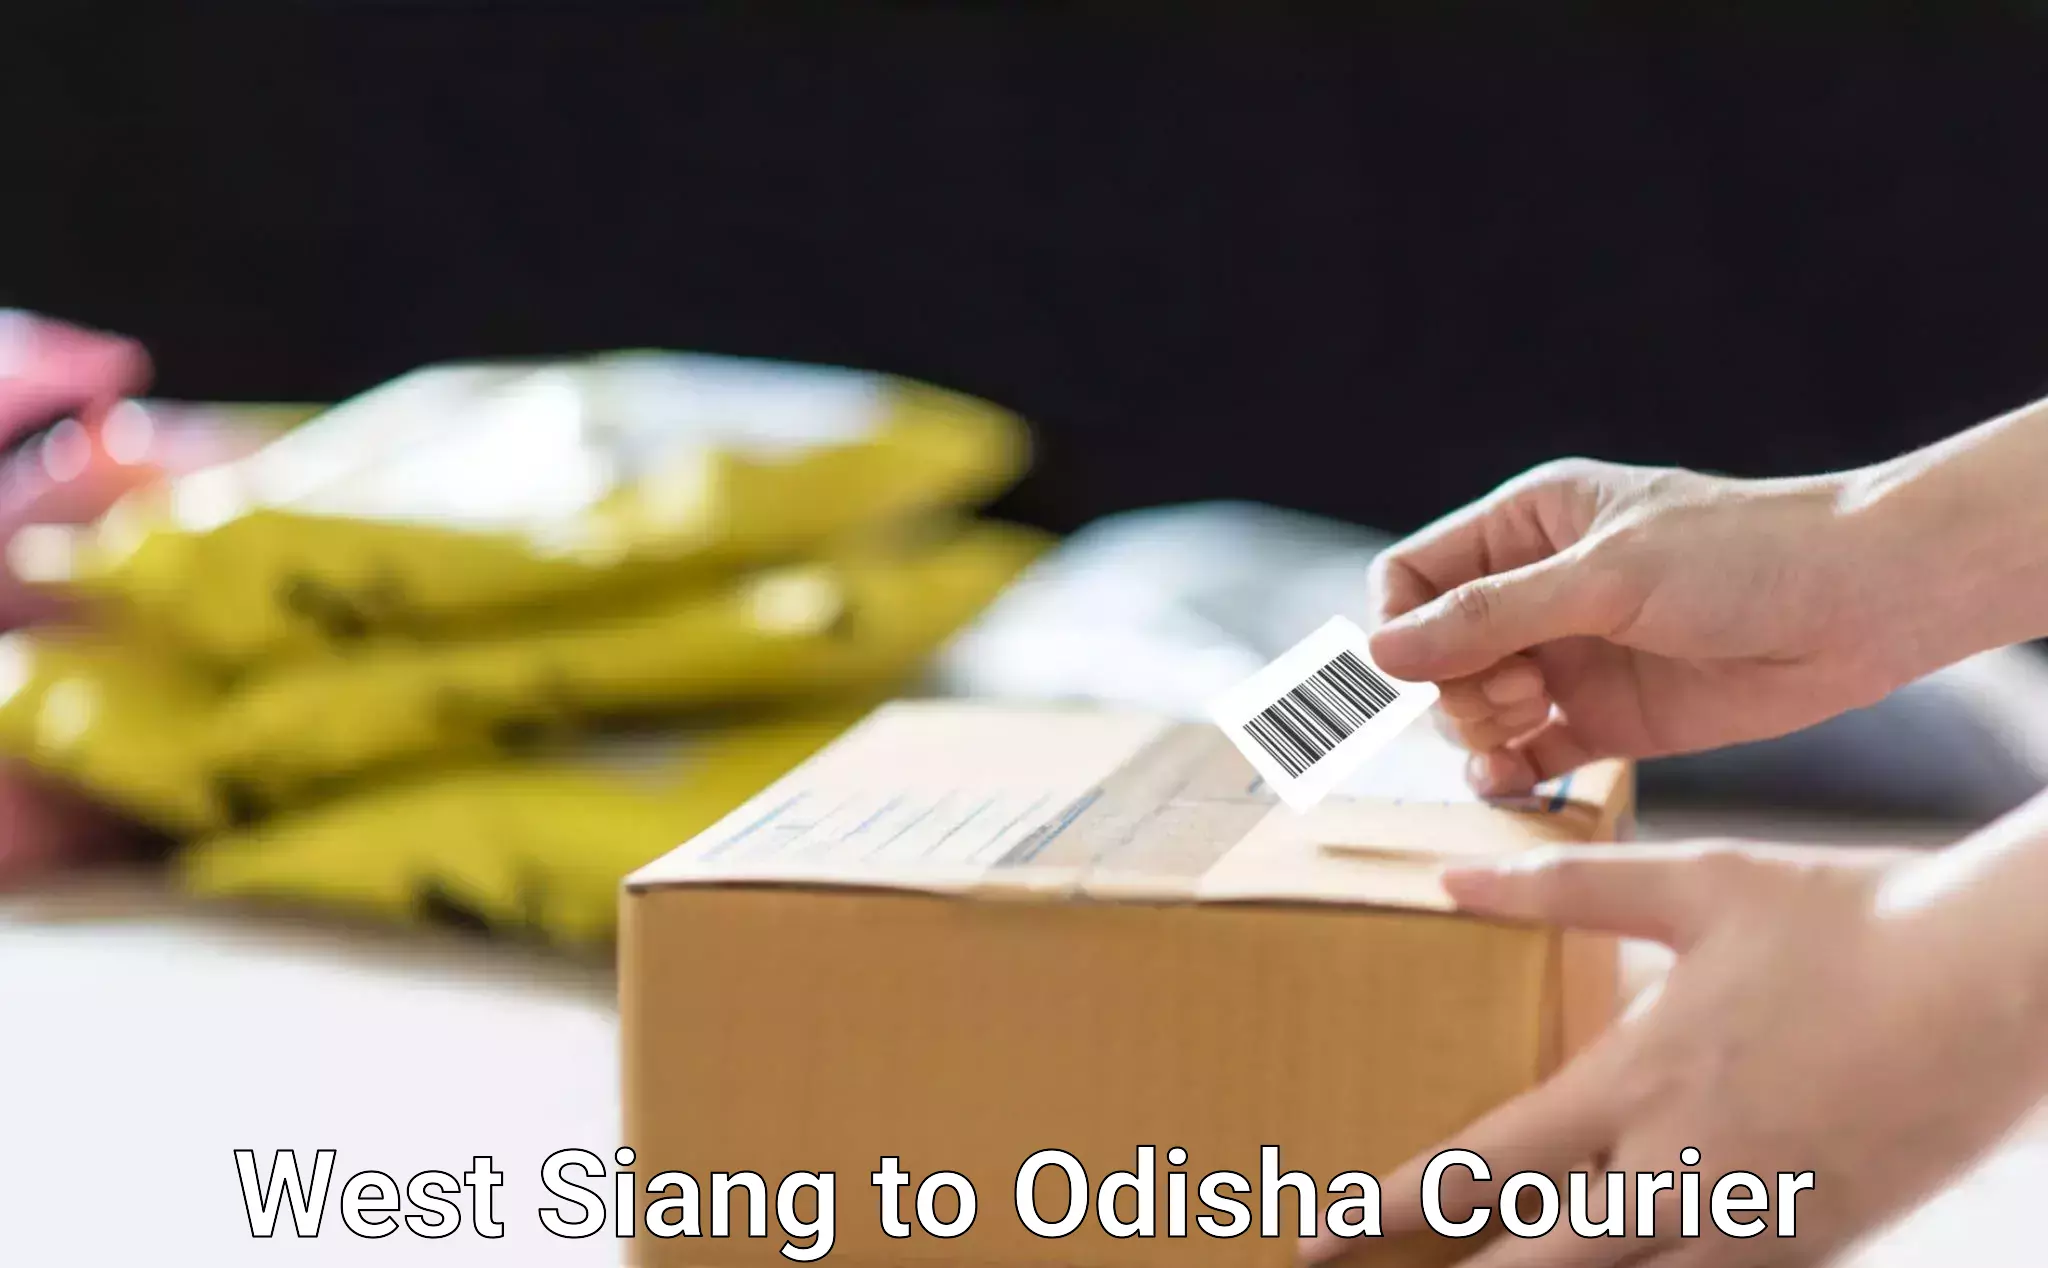 Modern courier technology West Siang to Odisha